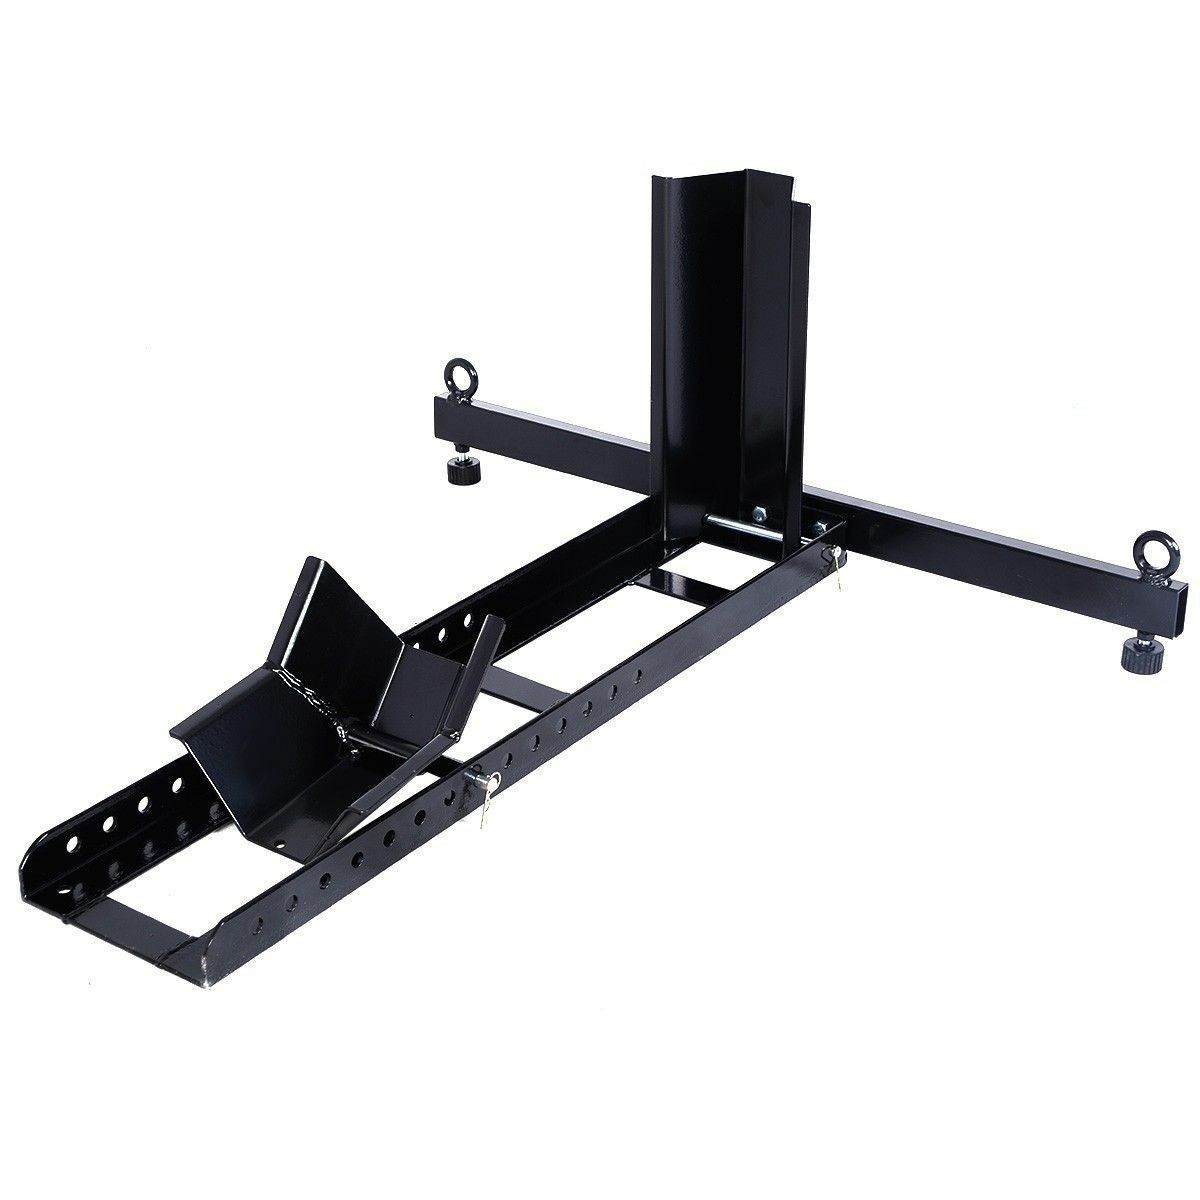 Image 2 - 1800 lbs Adjustable Motorcycle Wheel Chock Upright Stand Support